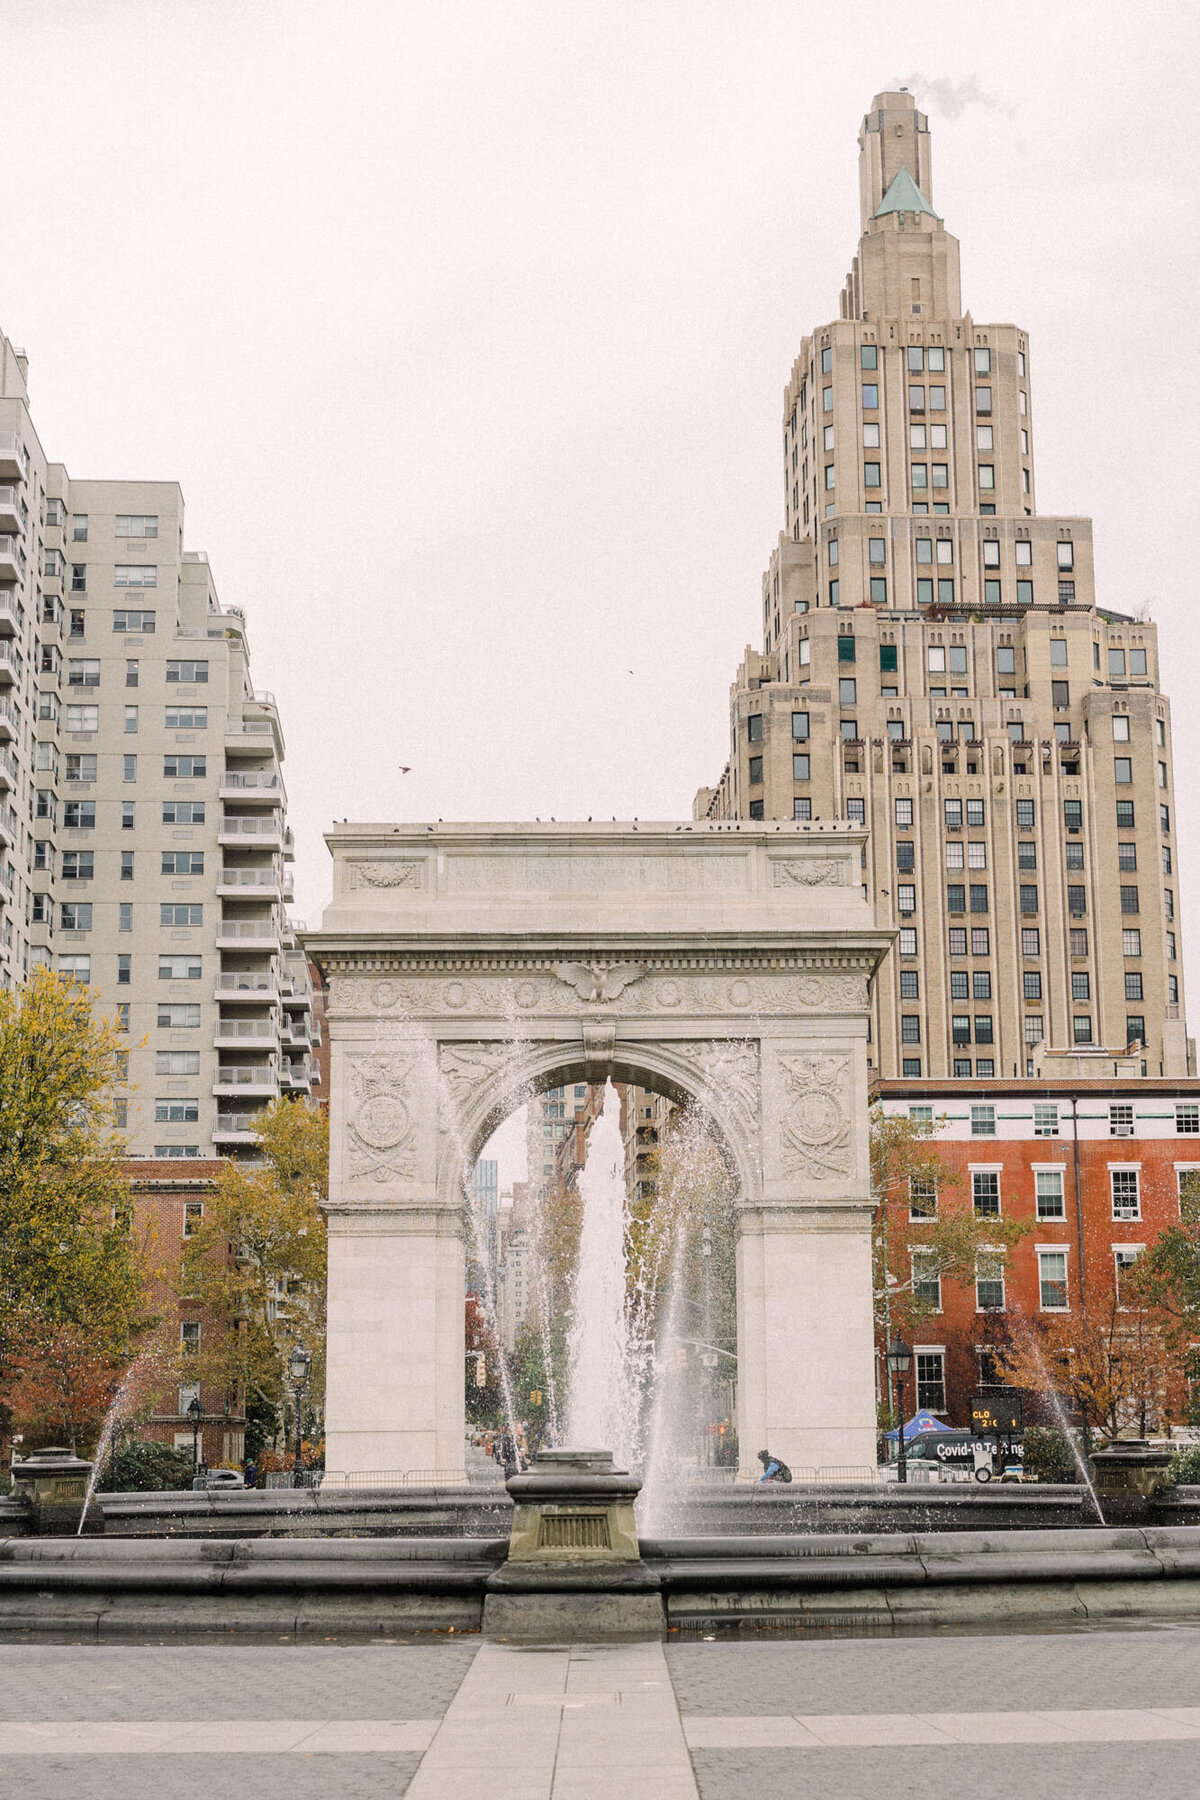 A beautiful photo of Washington Square Park in New York City